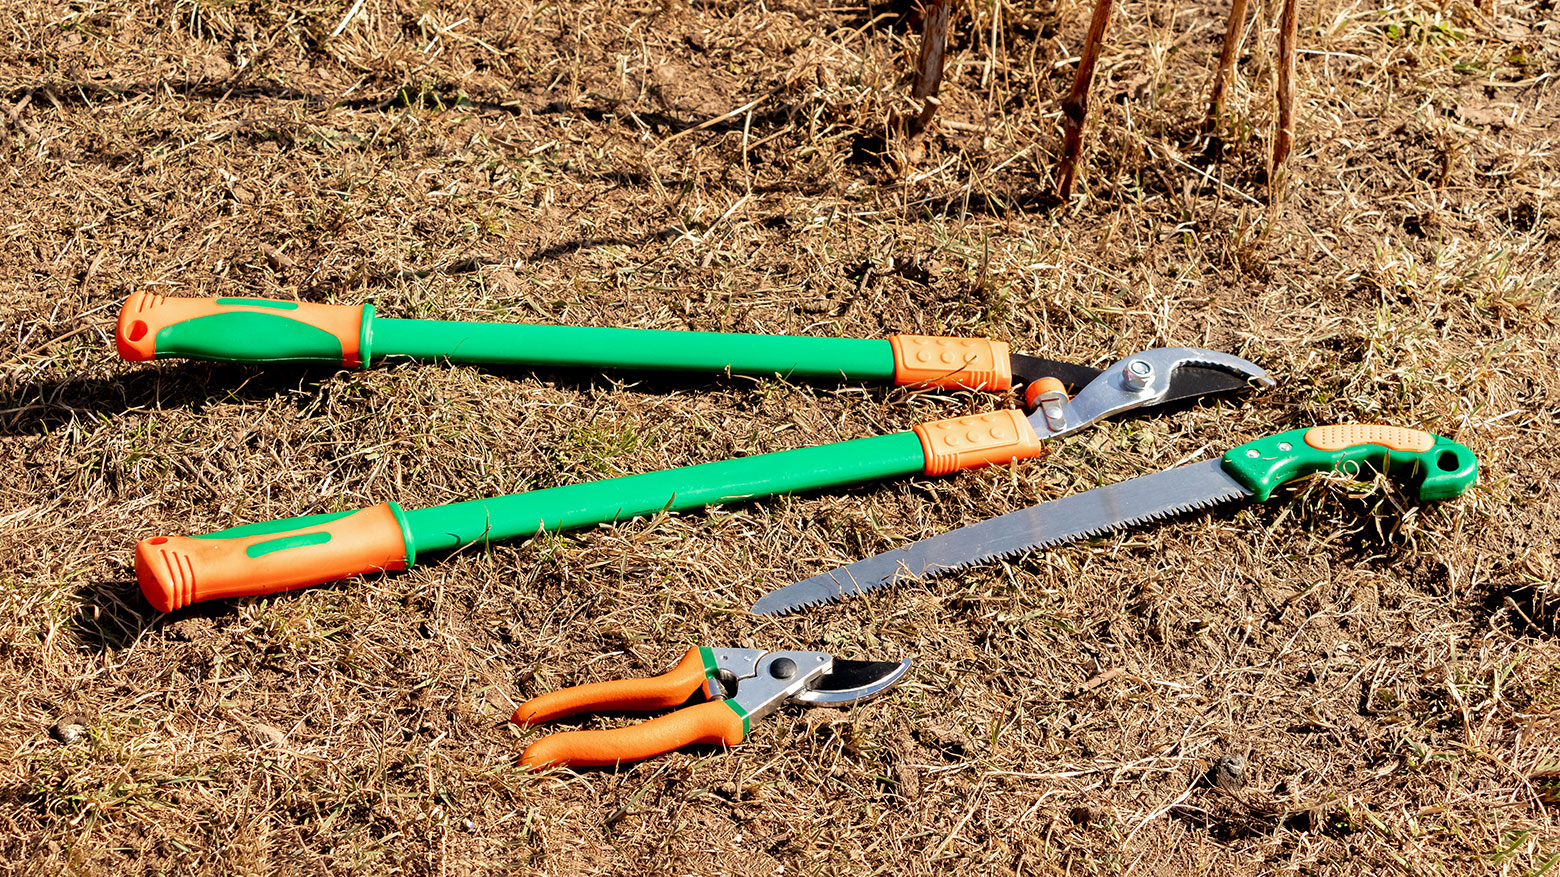 Shears And A Pruning Saw For Trimming Trees 